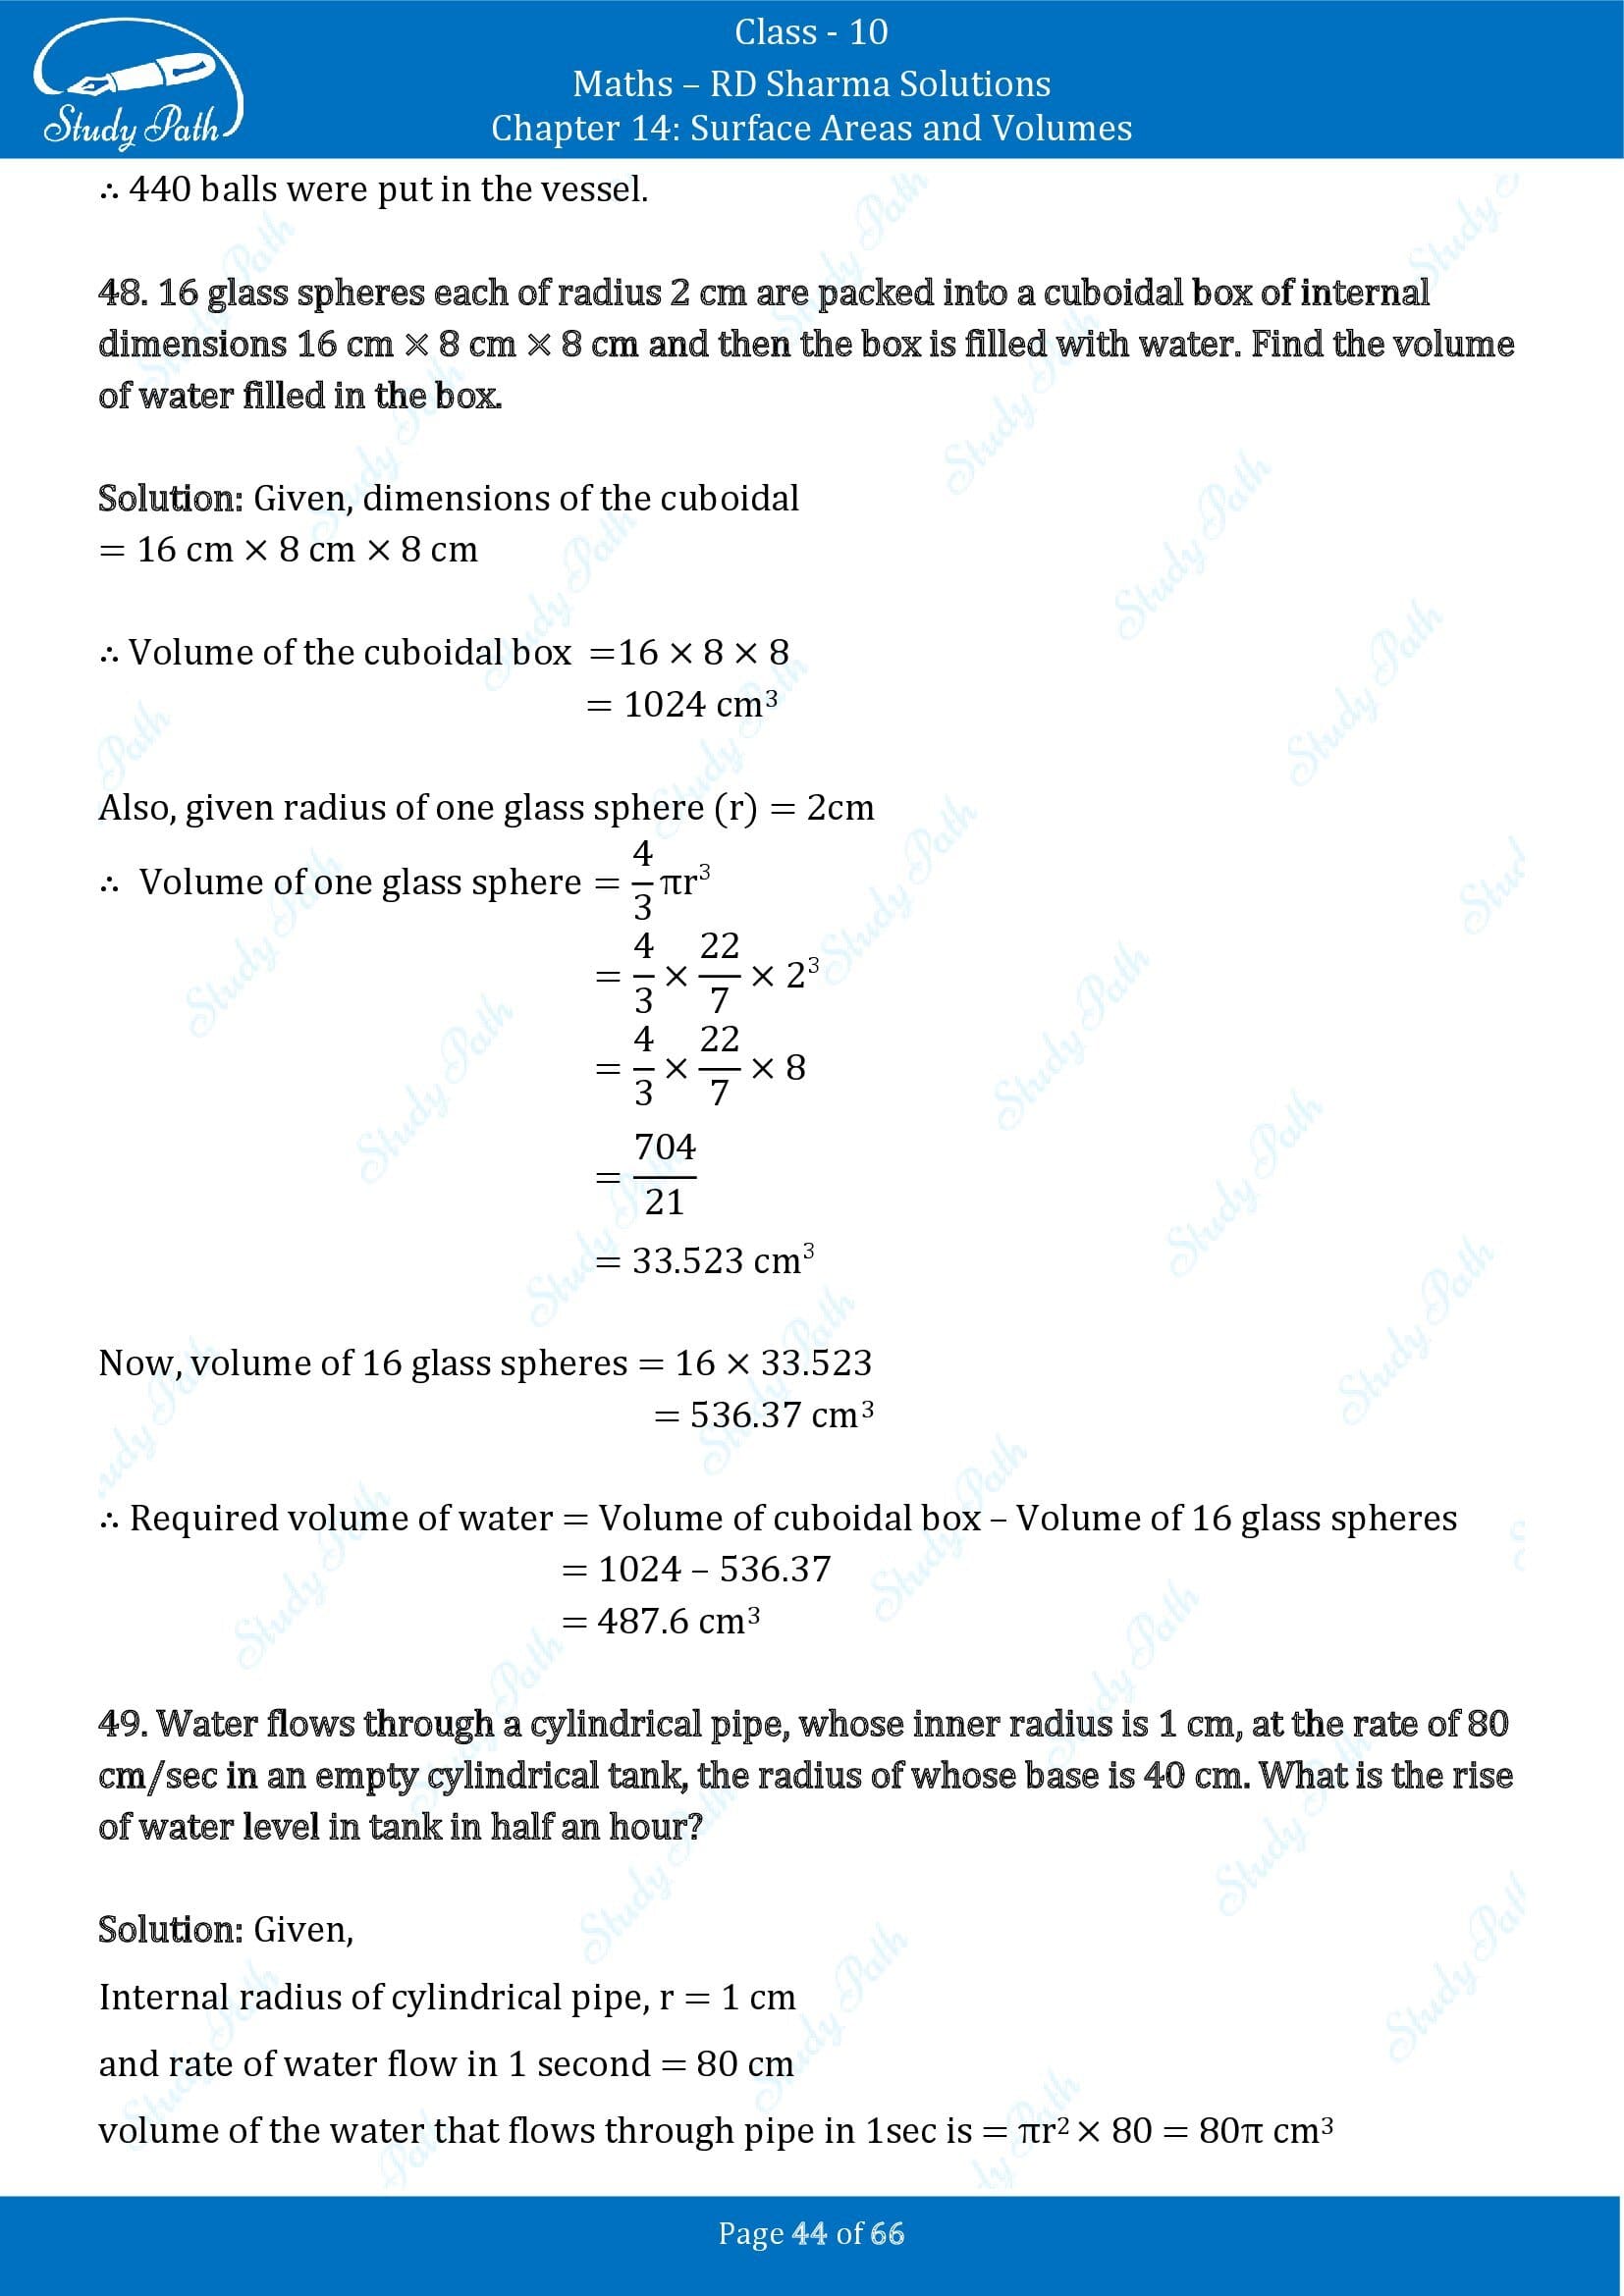 RD Sharma Solutions Class 10 Chapter 14 Surface Areas and Volumes Exercise 14.1 00044